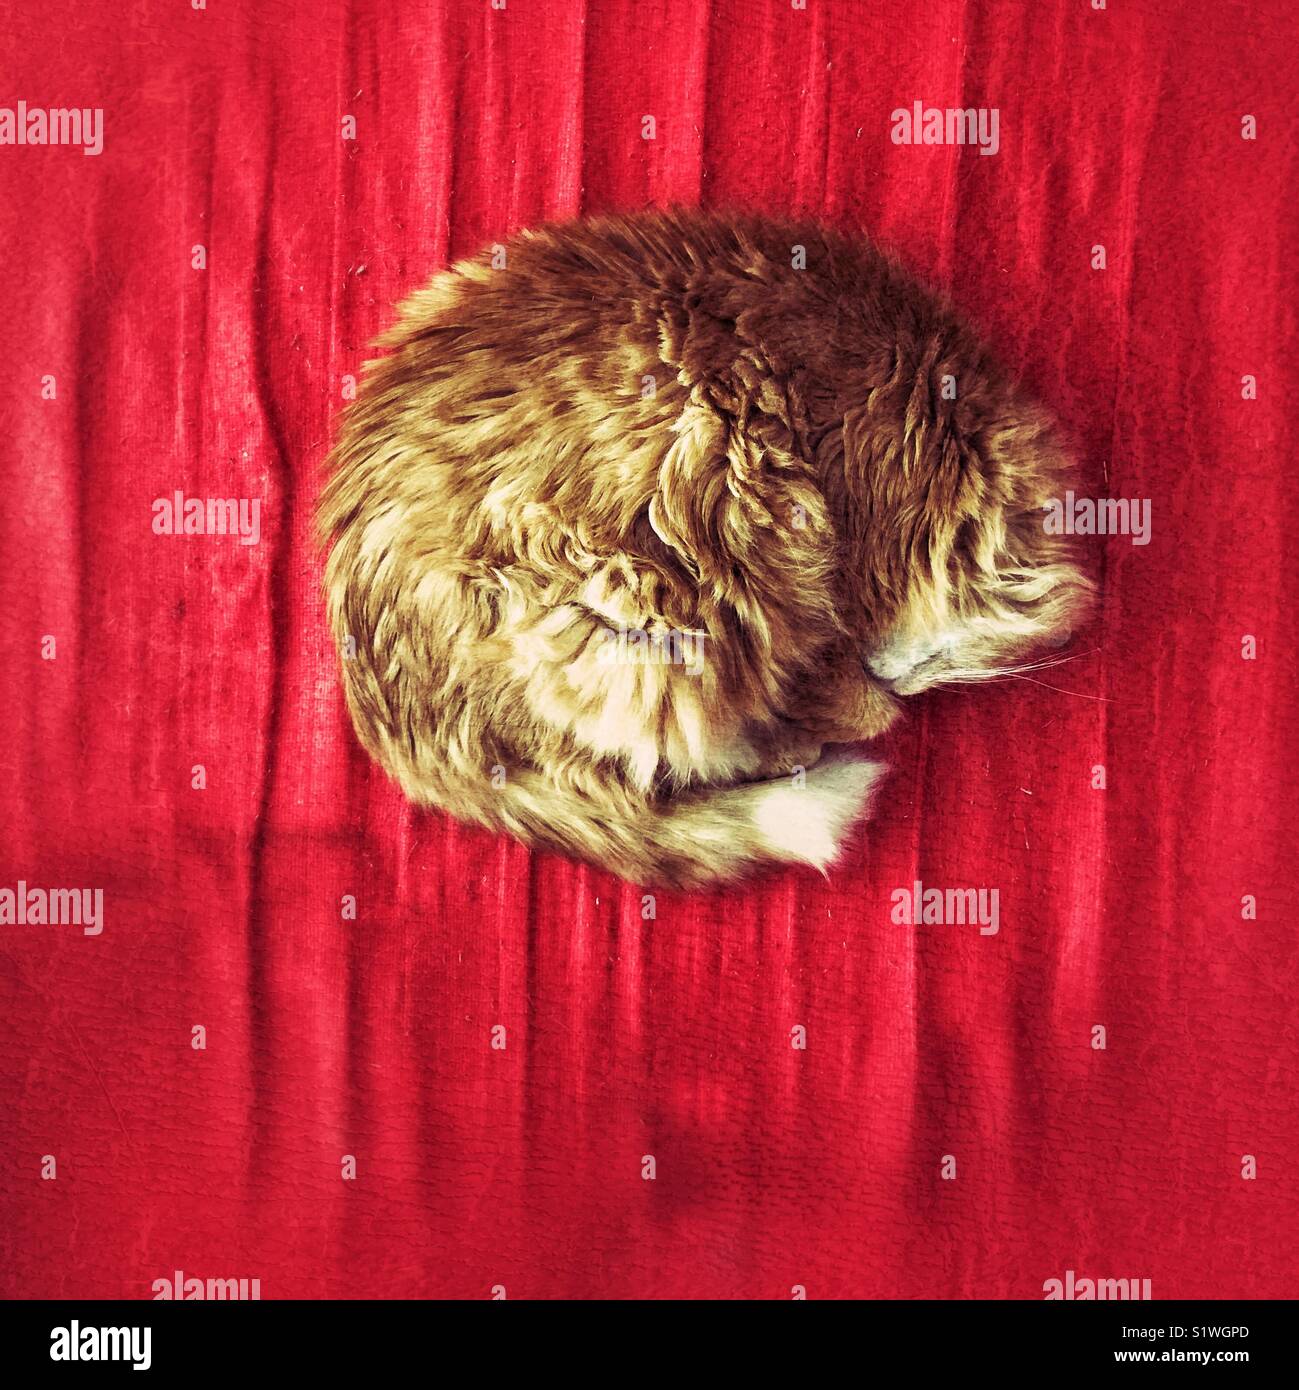 Fluffy orange long haired cat curled up sleeping on an old red mattress Stock Photo